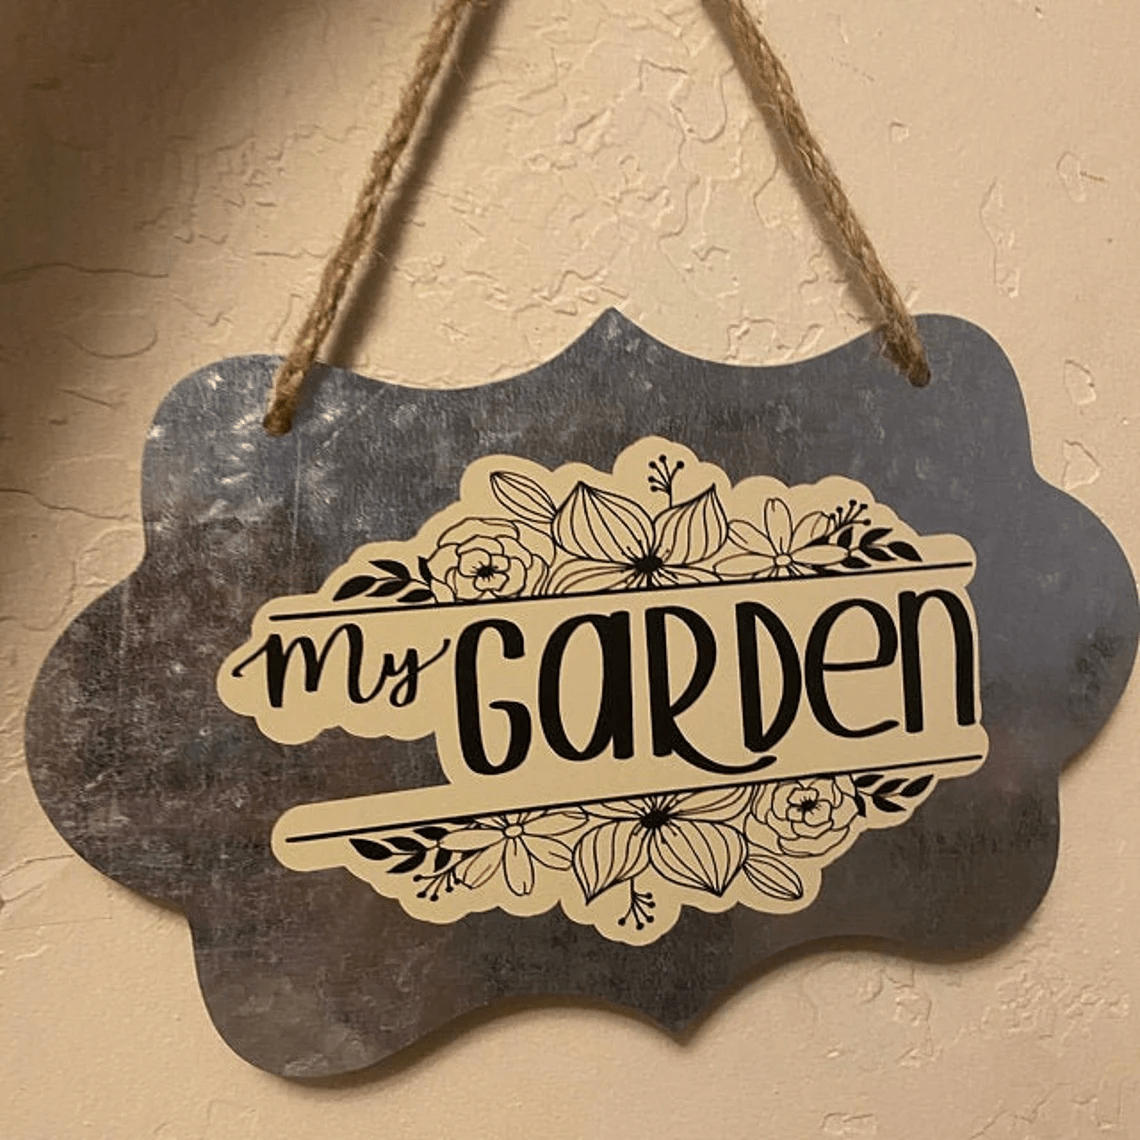 The inscription on the boards on the theme of the garden.